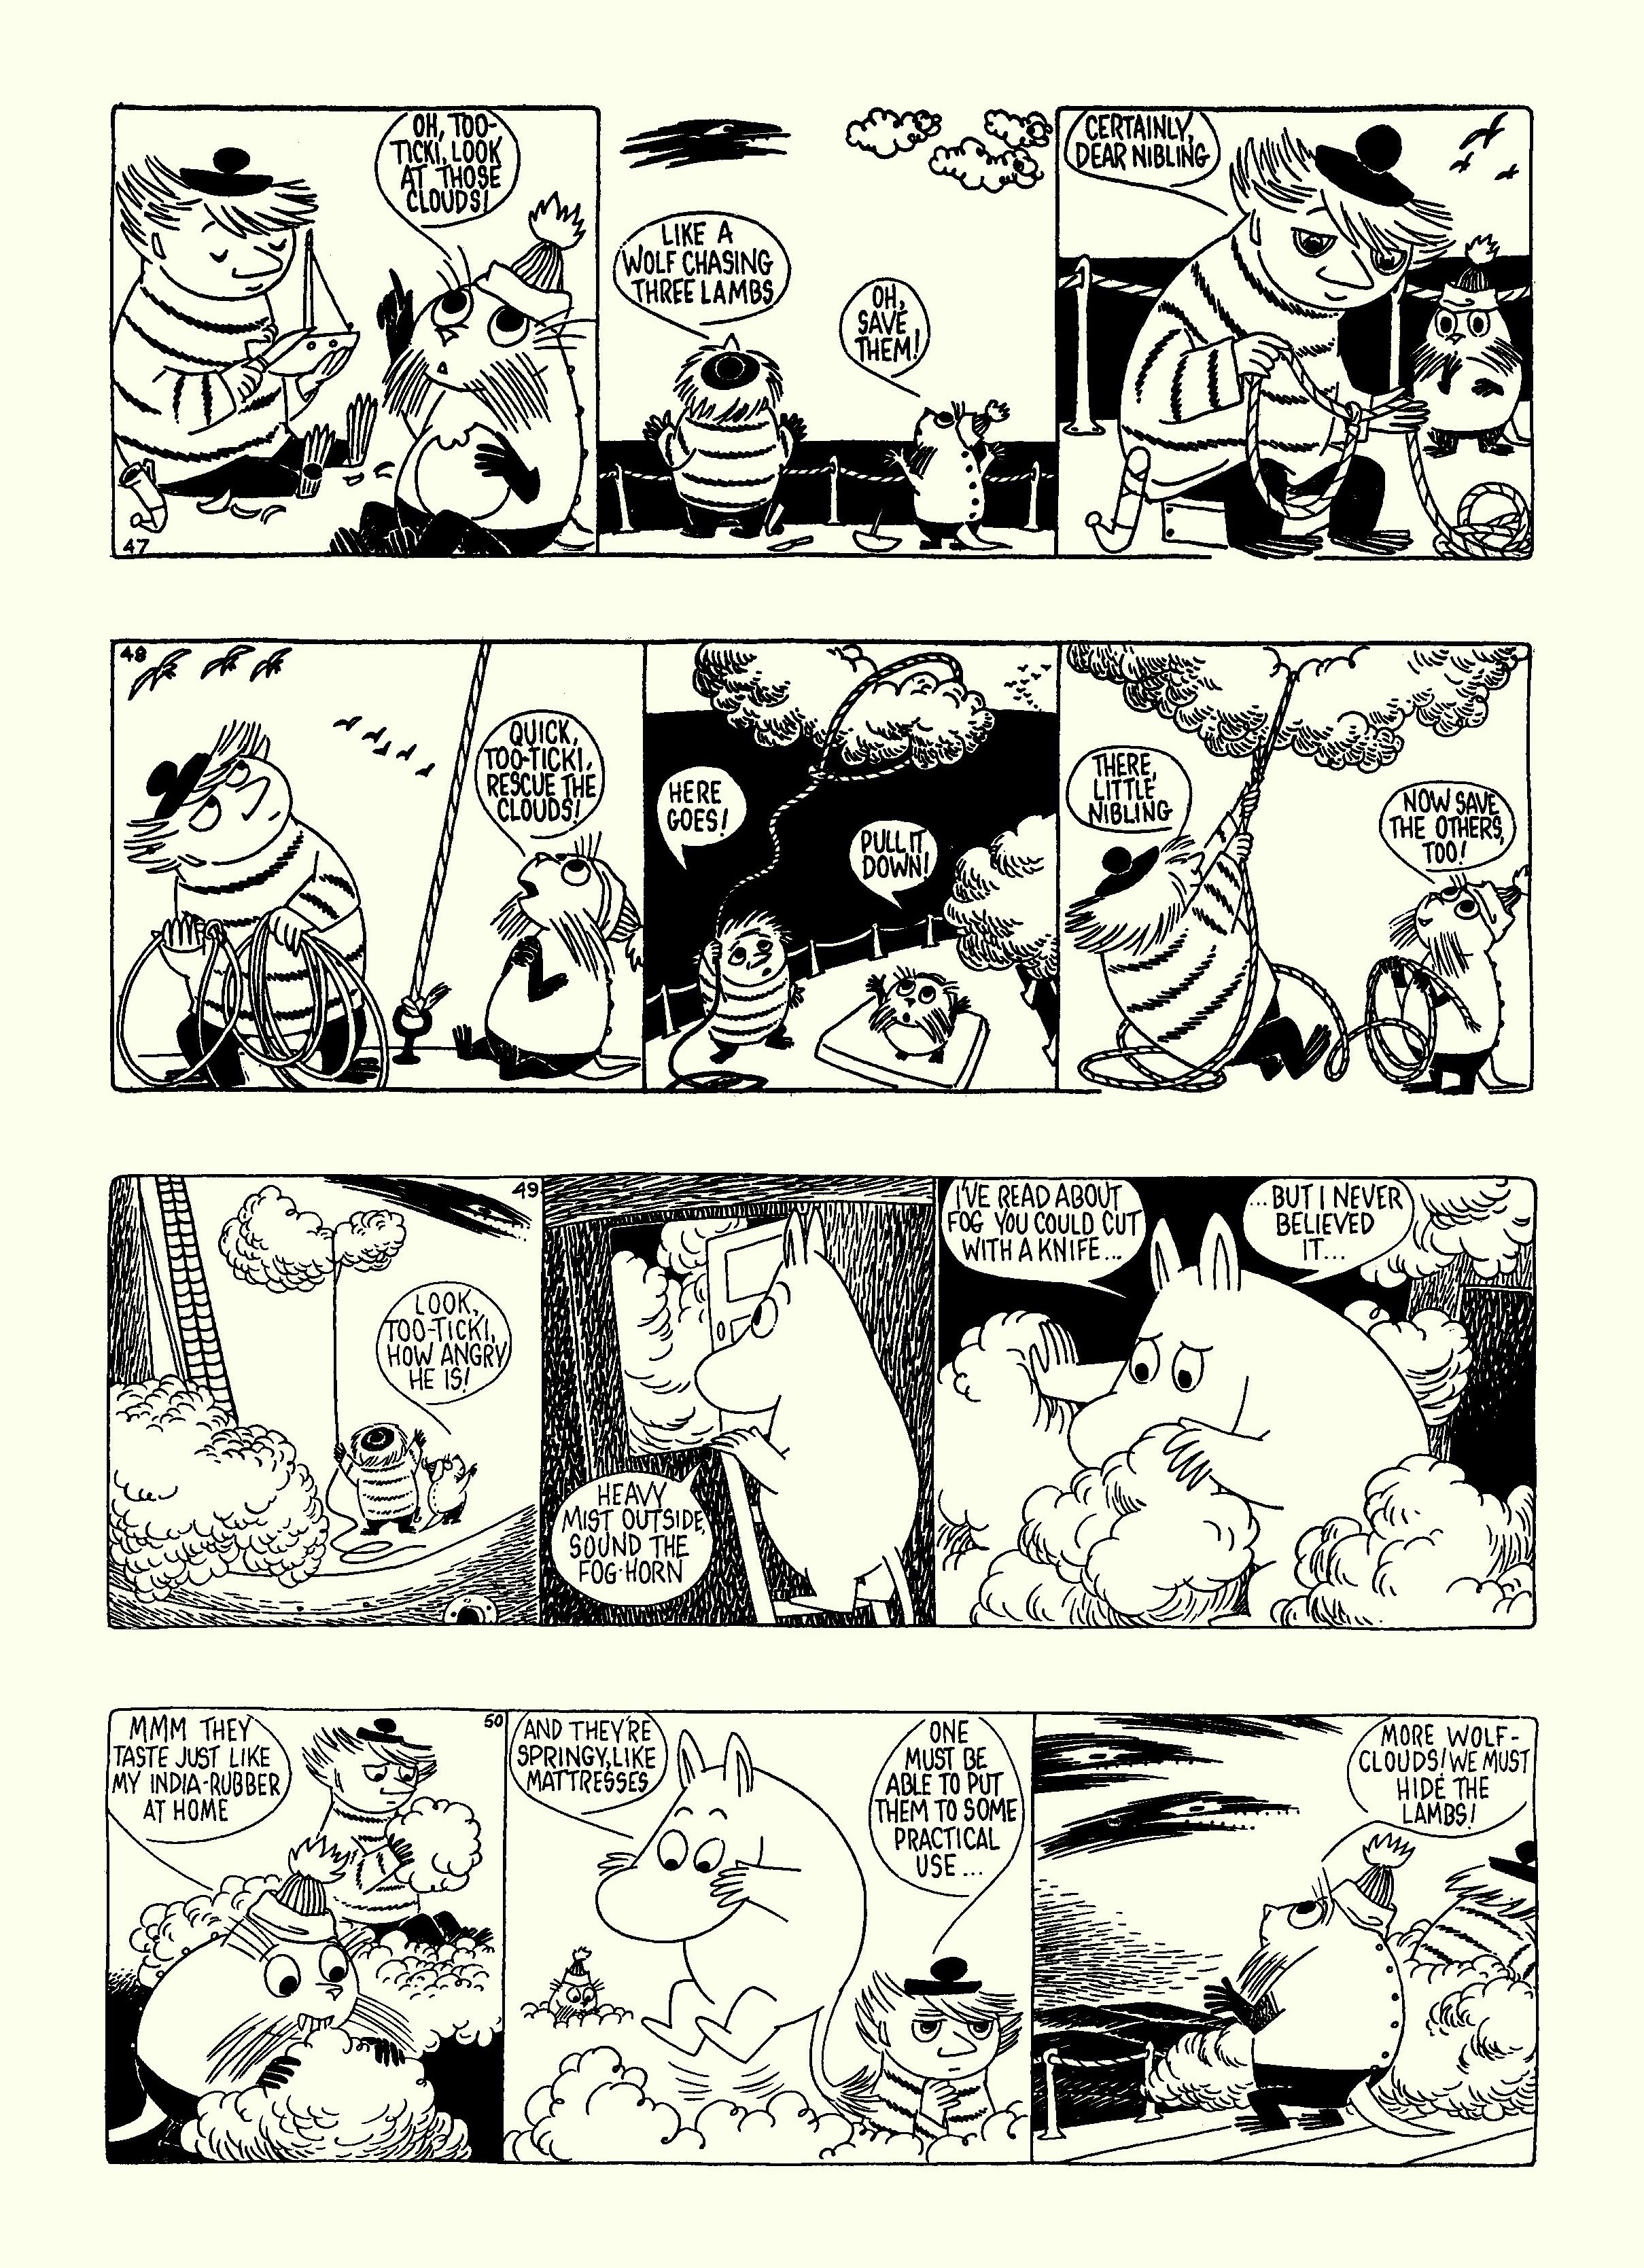 Read online Moomin: The Complete Tove Jansson Comic Strip comic -  Issue # TPB 5 - 43